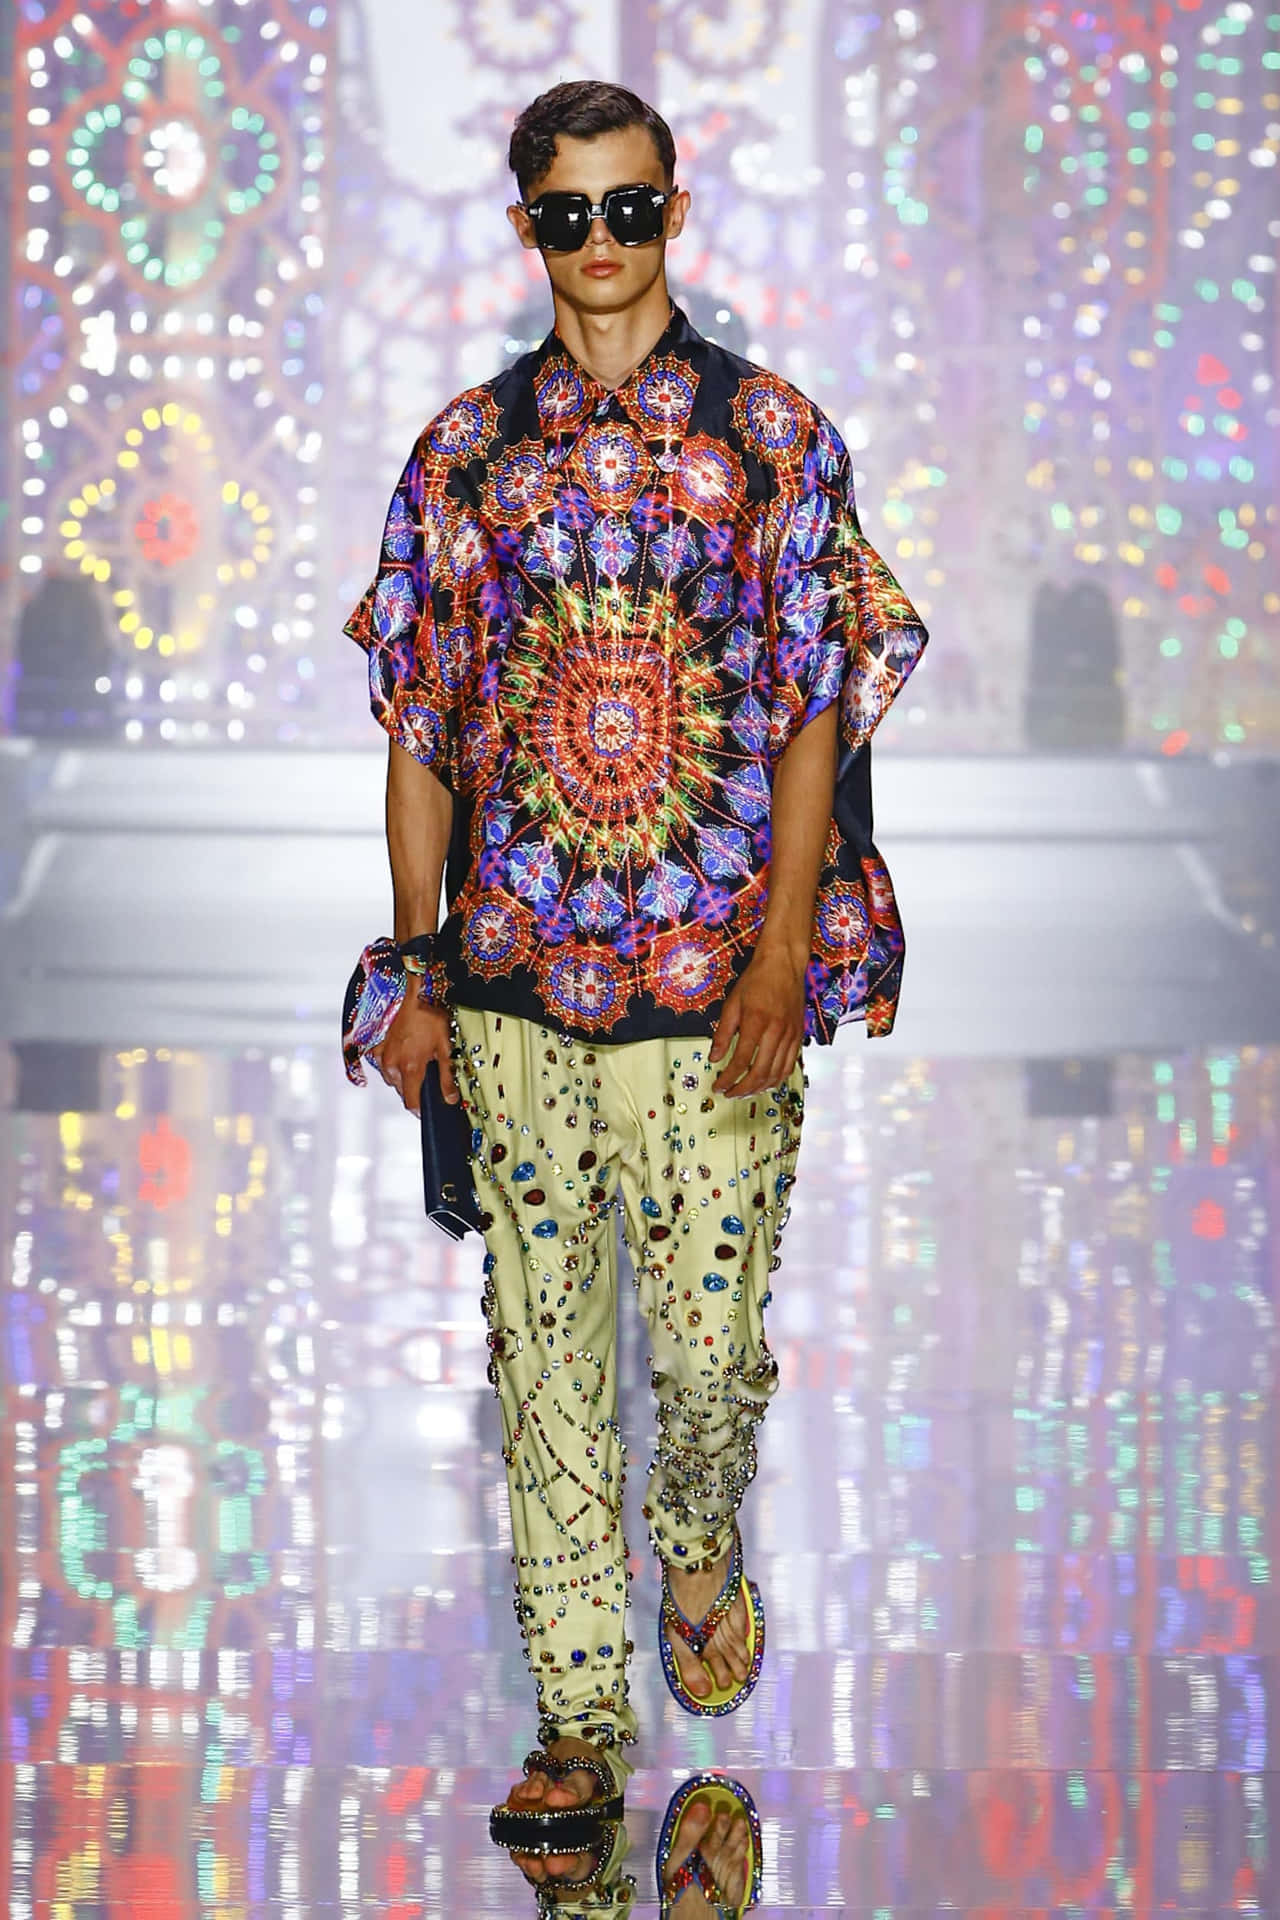 Download A Man Wearing A Colorful Shirt And Pants On The Runway ...